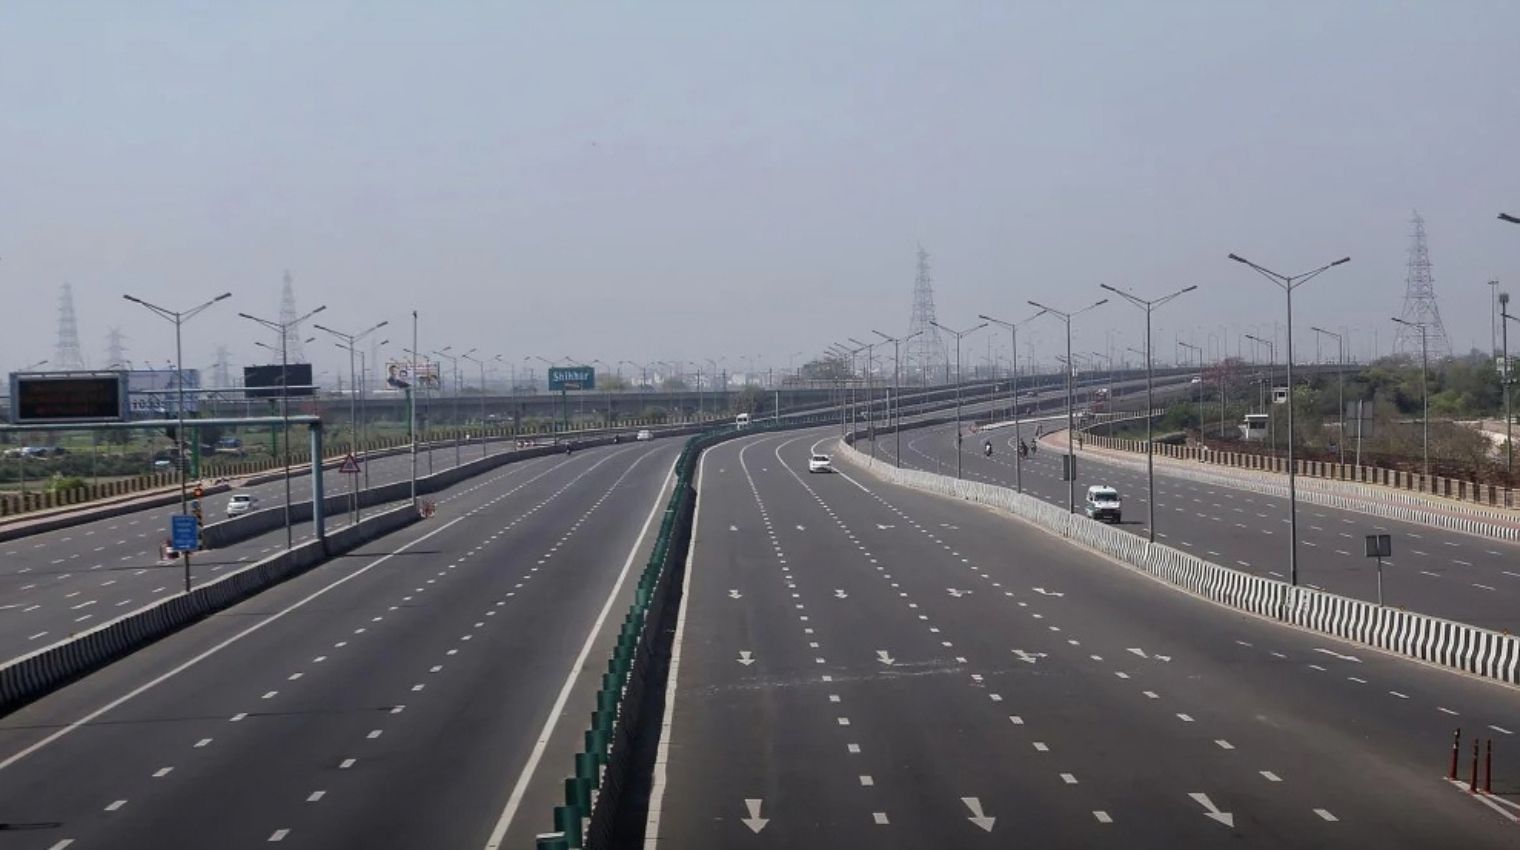 “India’s Highways Authority Embarks on Self-Repairing Road Project”